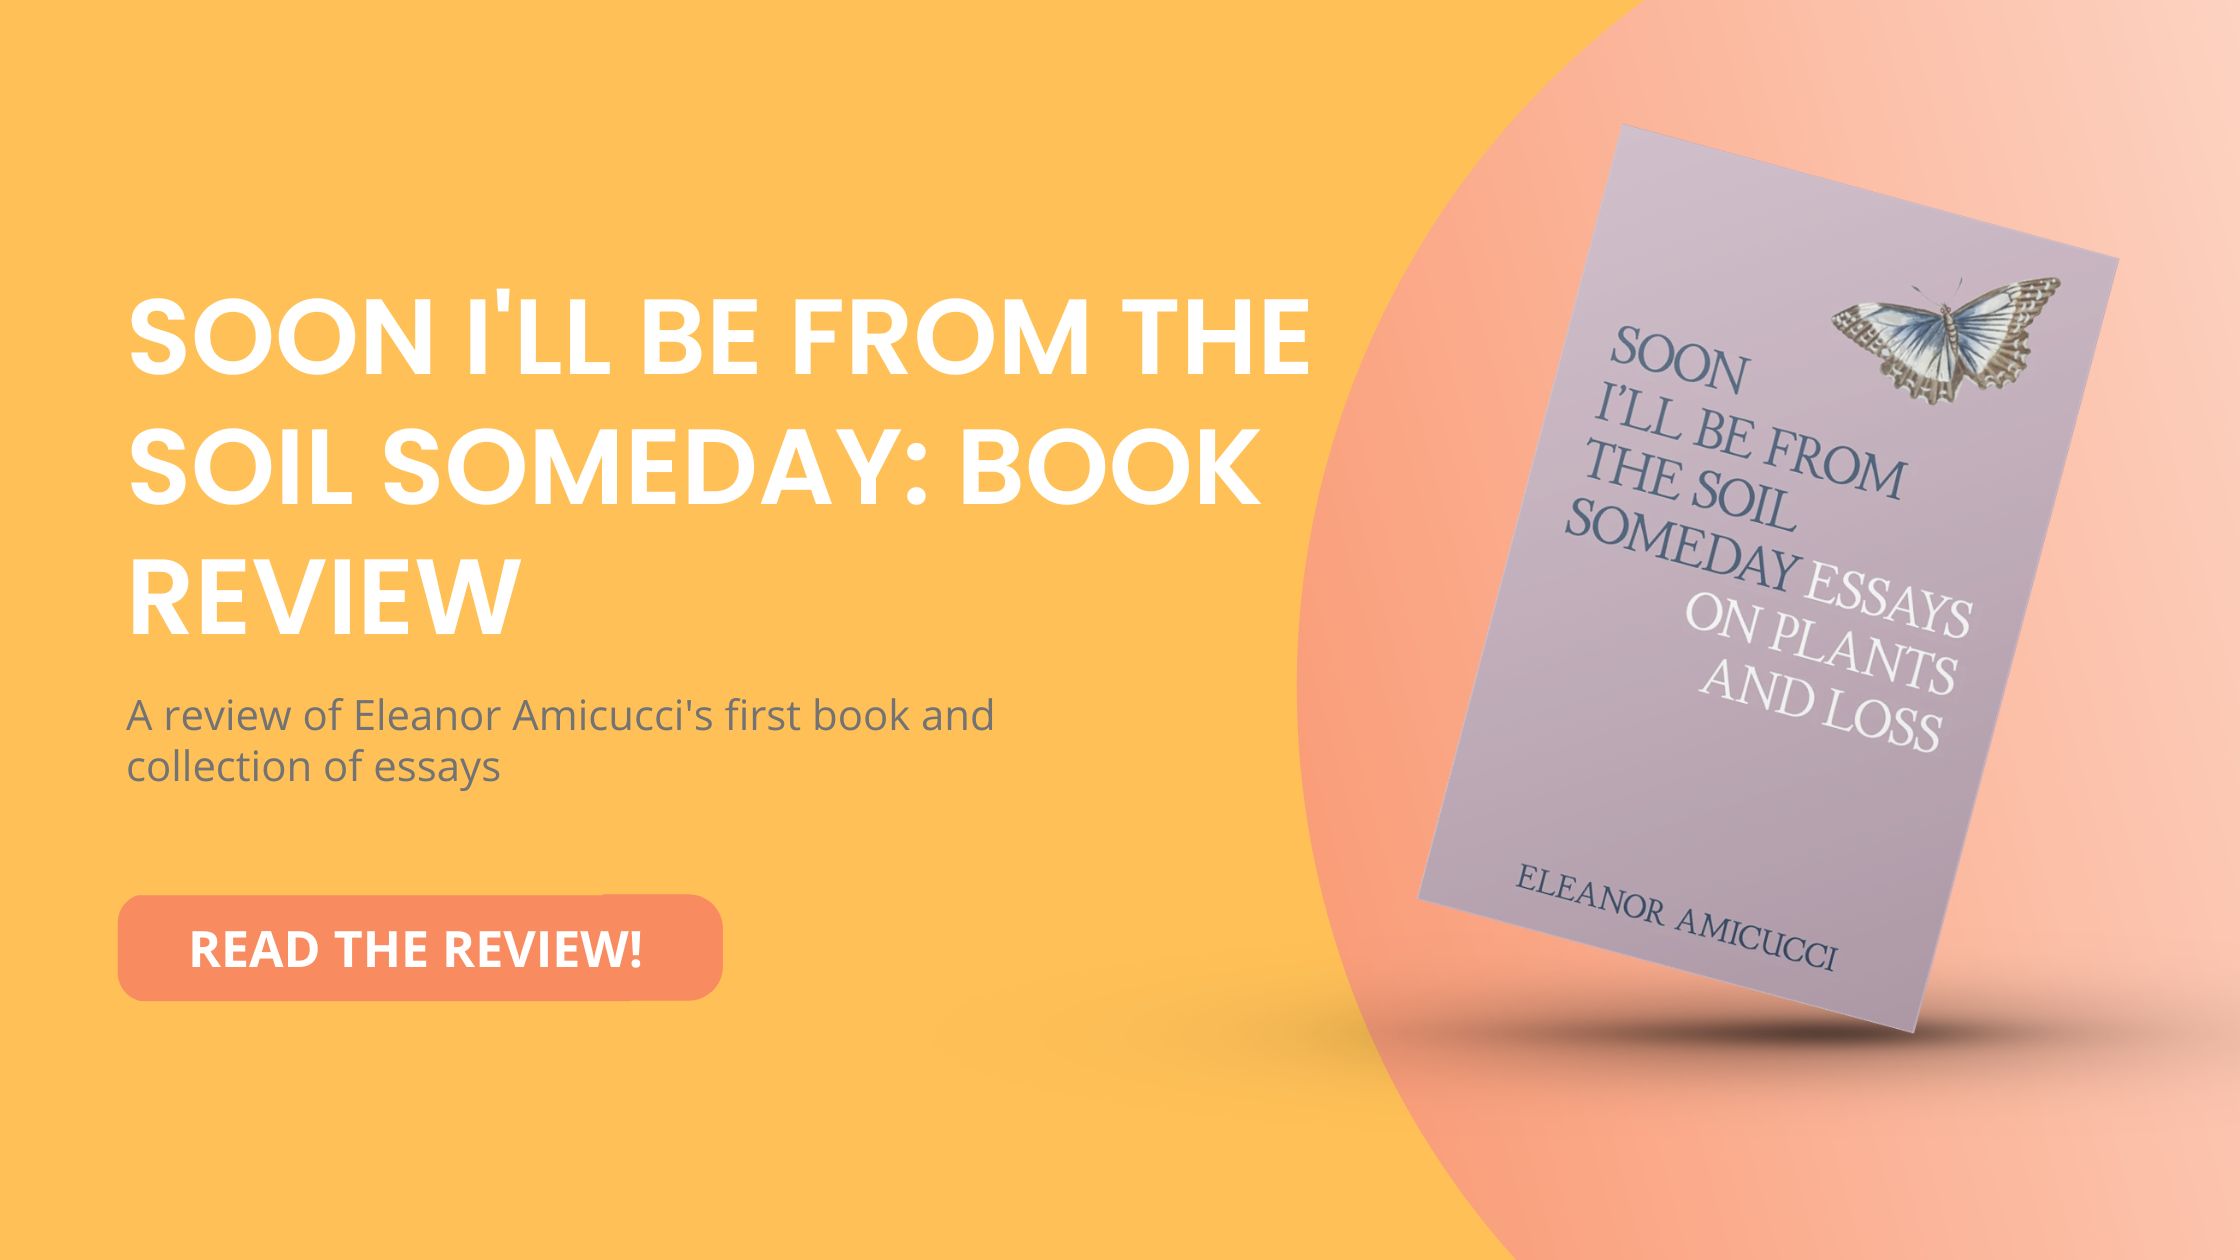 “Soon I’ll Be From the Soil Someday” by Eleanor Amicucci: Book Review